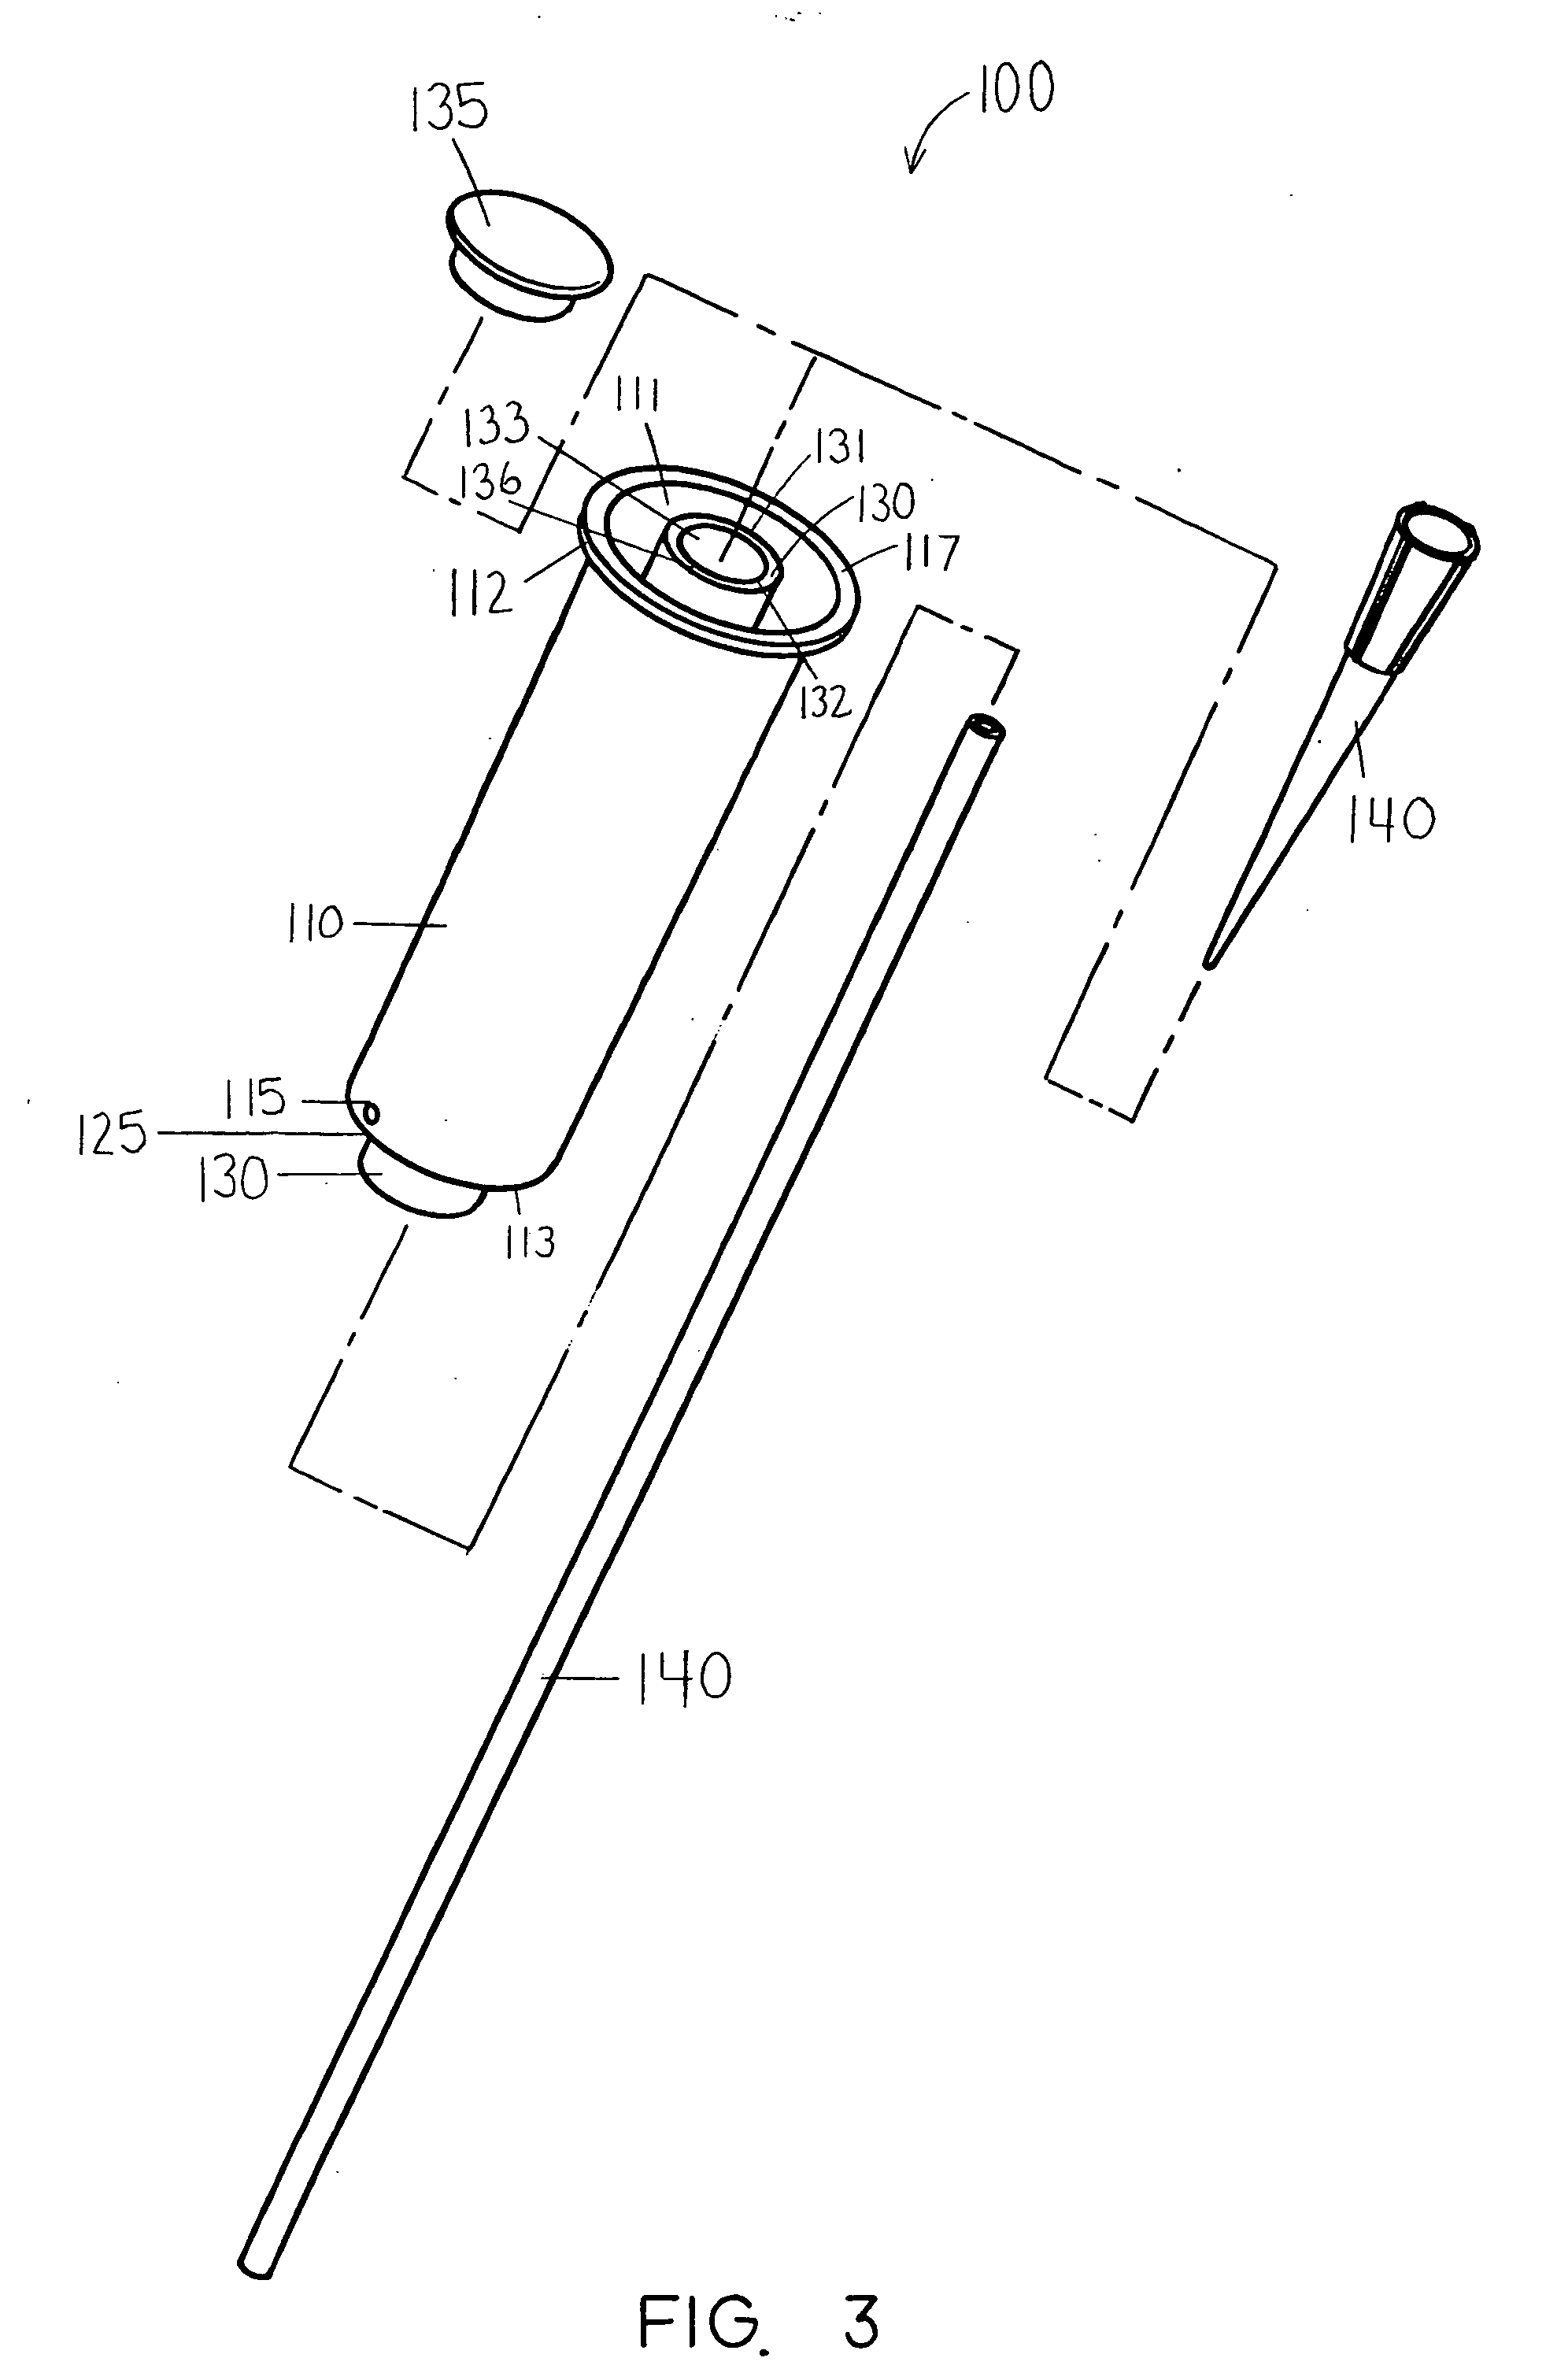 Apparatus and process for reducing pathogens in a biological sample and removing a sample pellet from a sample tube